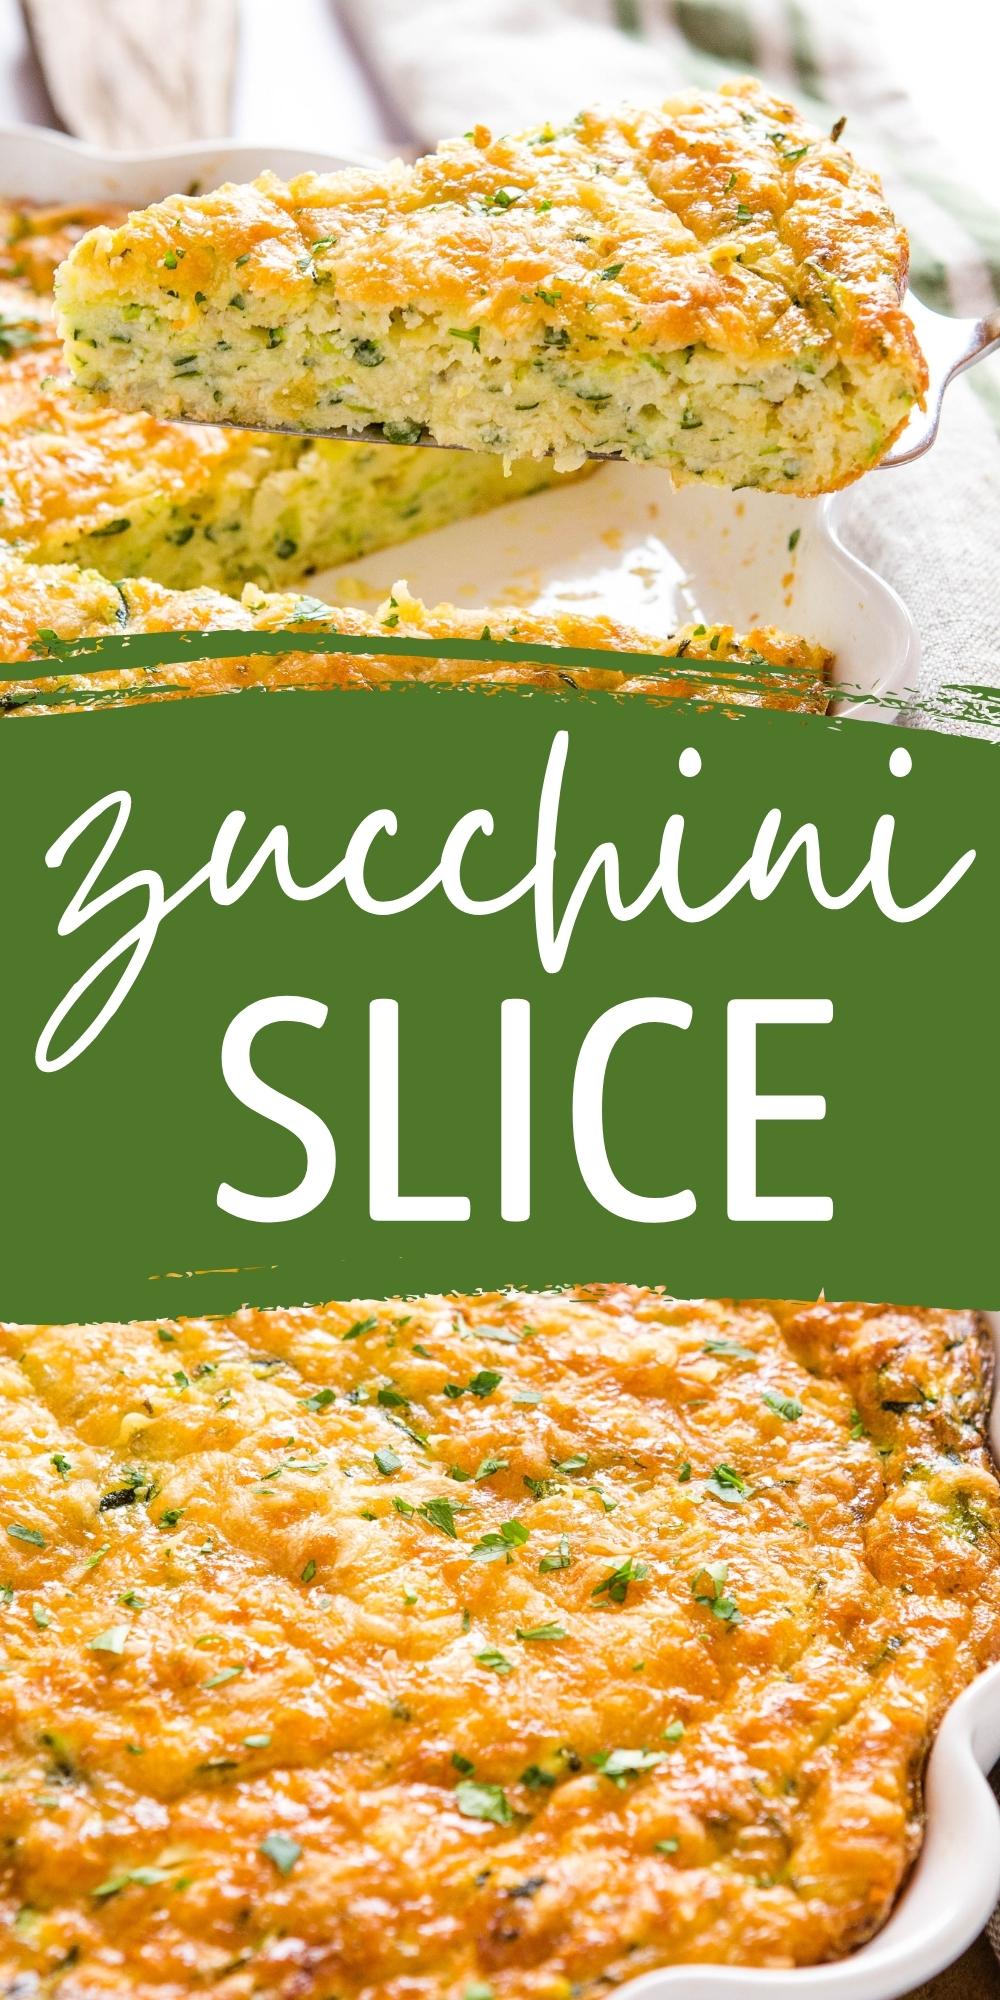 This Zucchini Slice recipe is part quiche & part pie, and it's packed with veggies, cheese, & savoury flavours! The perfect breakfast or lunch! Recipe from thebusybaker.ca! #zucchinislice #zucchini #quiche #eggs #brunch #pie #breakfast via @busybakerblog